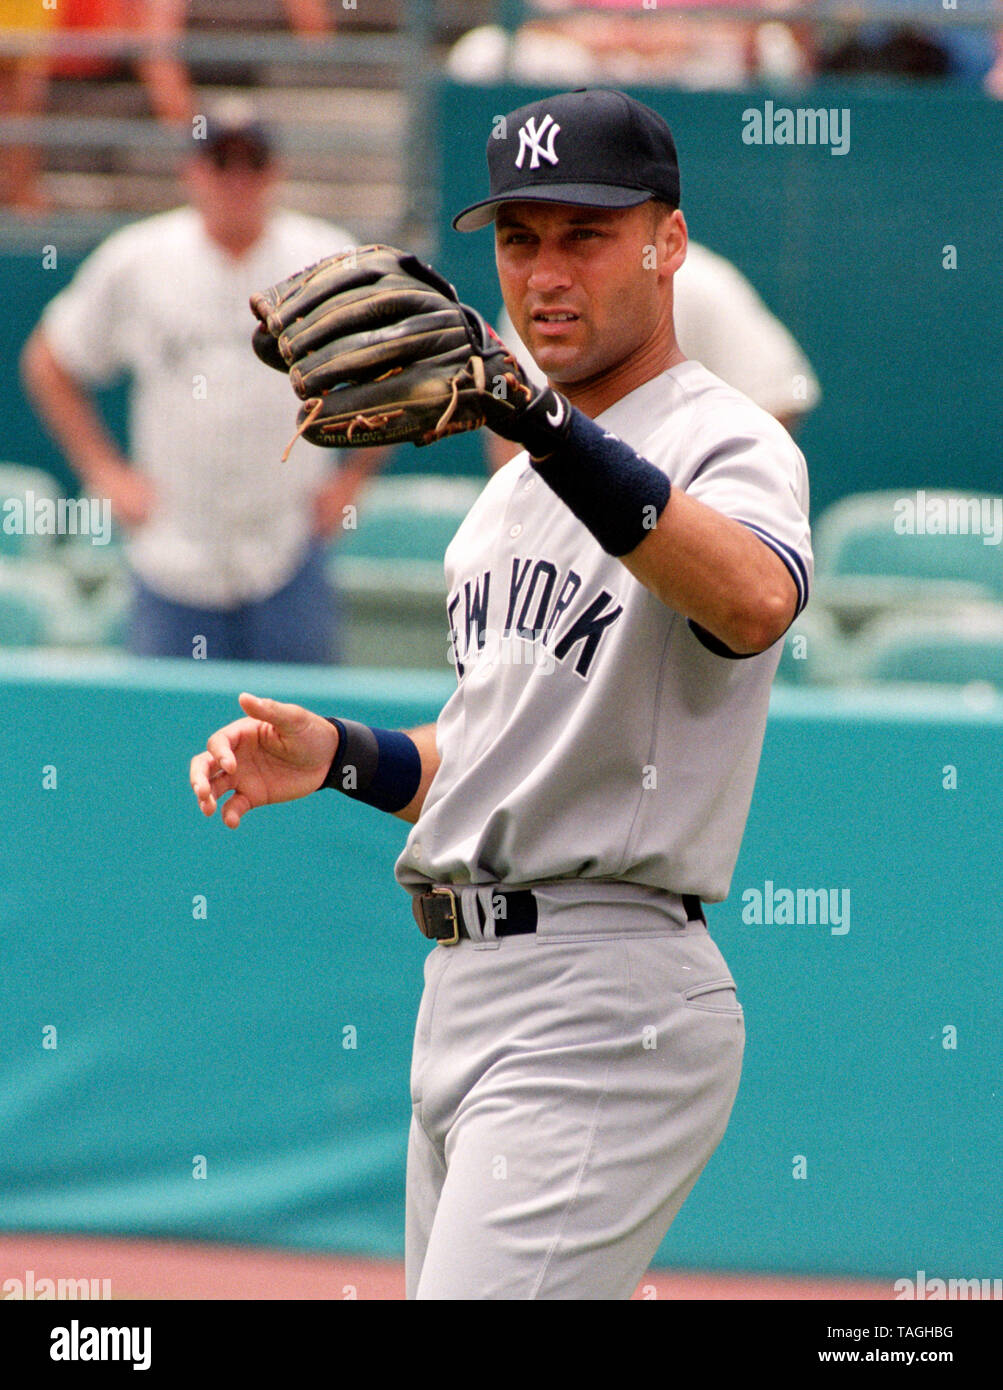 New York Yankee Derek Jeter during a game with the Florida Marlins at Joe Robbie Stadium in 2001 in Miami Florida. Stock Photo